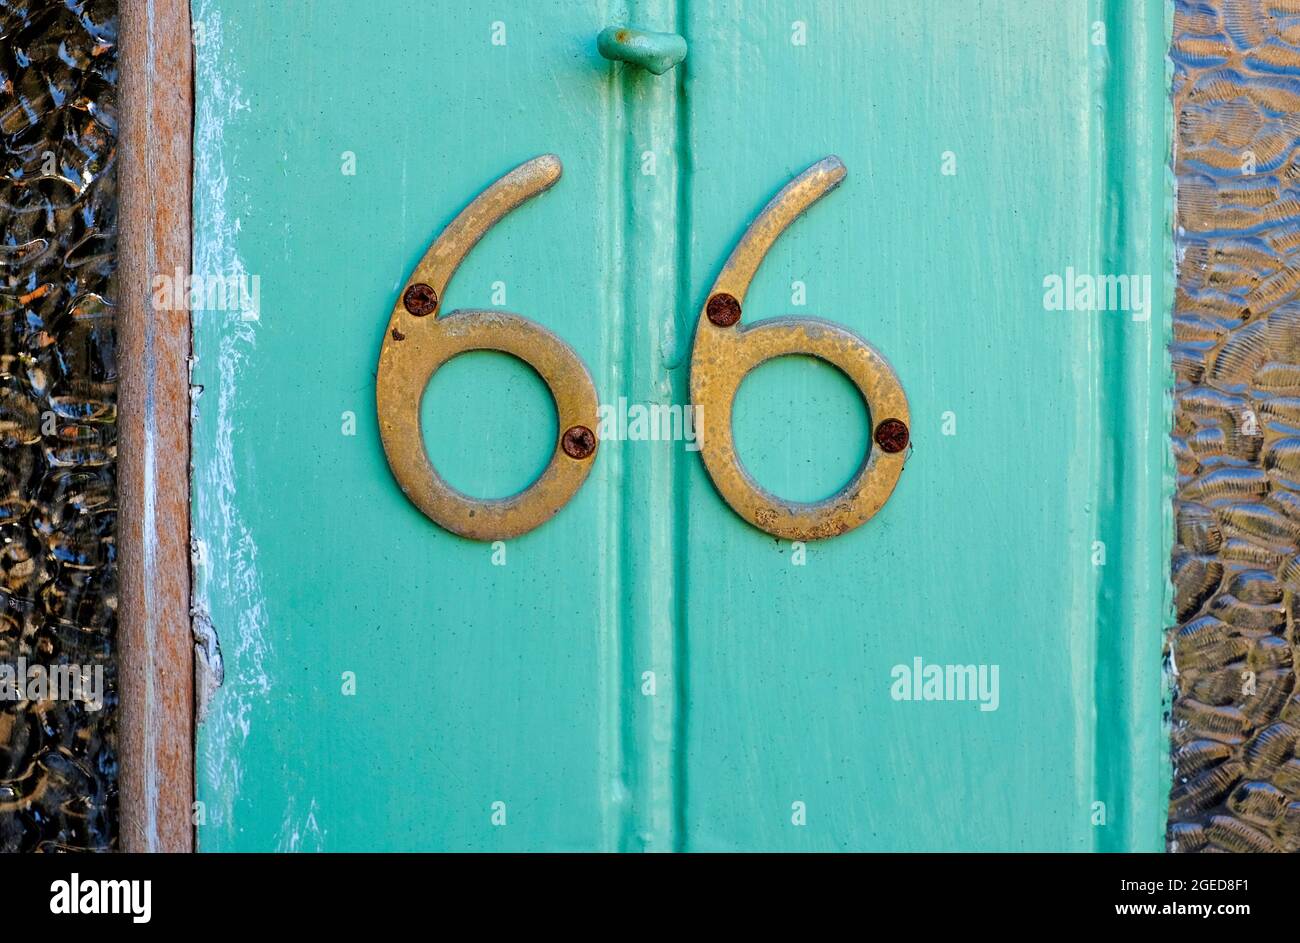 number 66 on blue front house door, norfolk, england Stock Photo